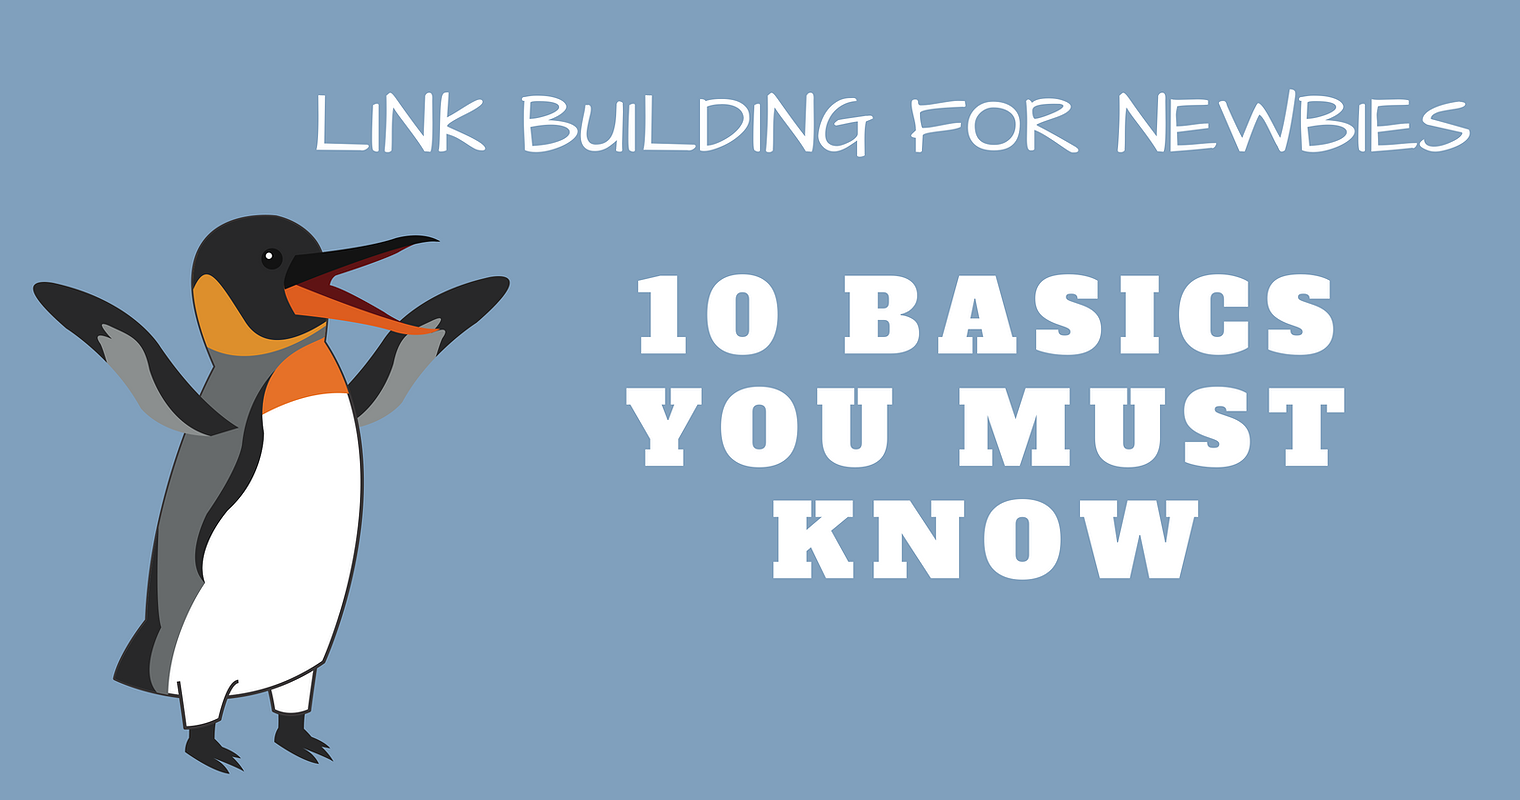 Link Building for Newbies: 10 Basics You Must Know